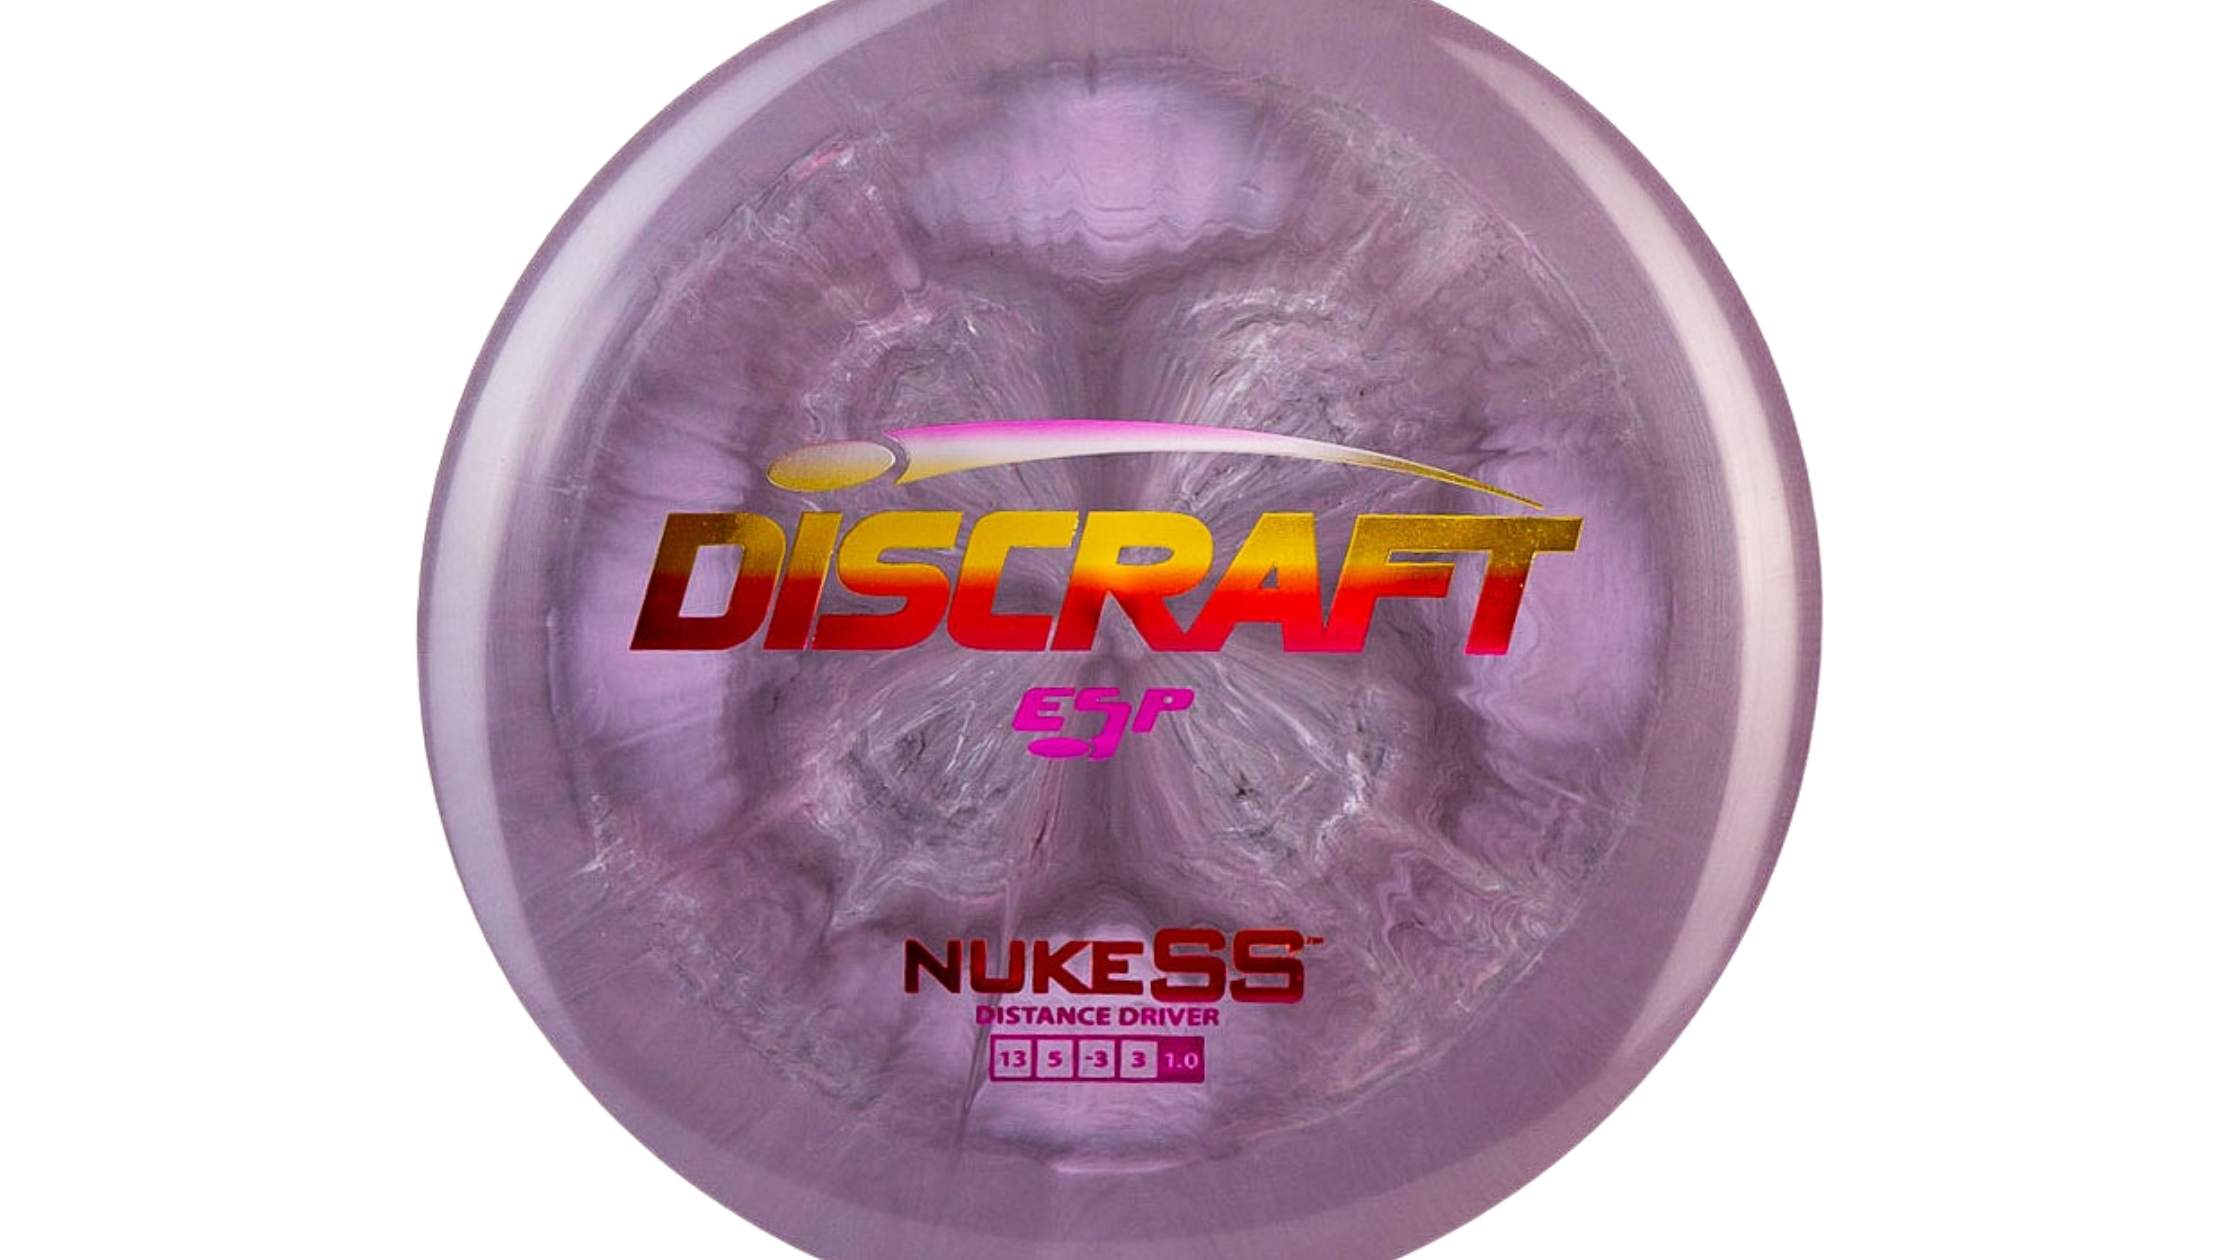 A purple Discraft ESP Nuke SS with a Sunset colored stamp